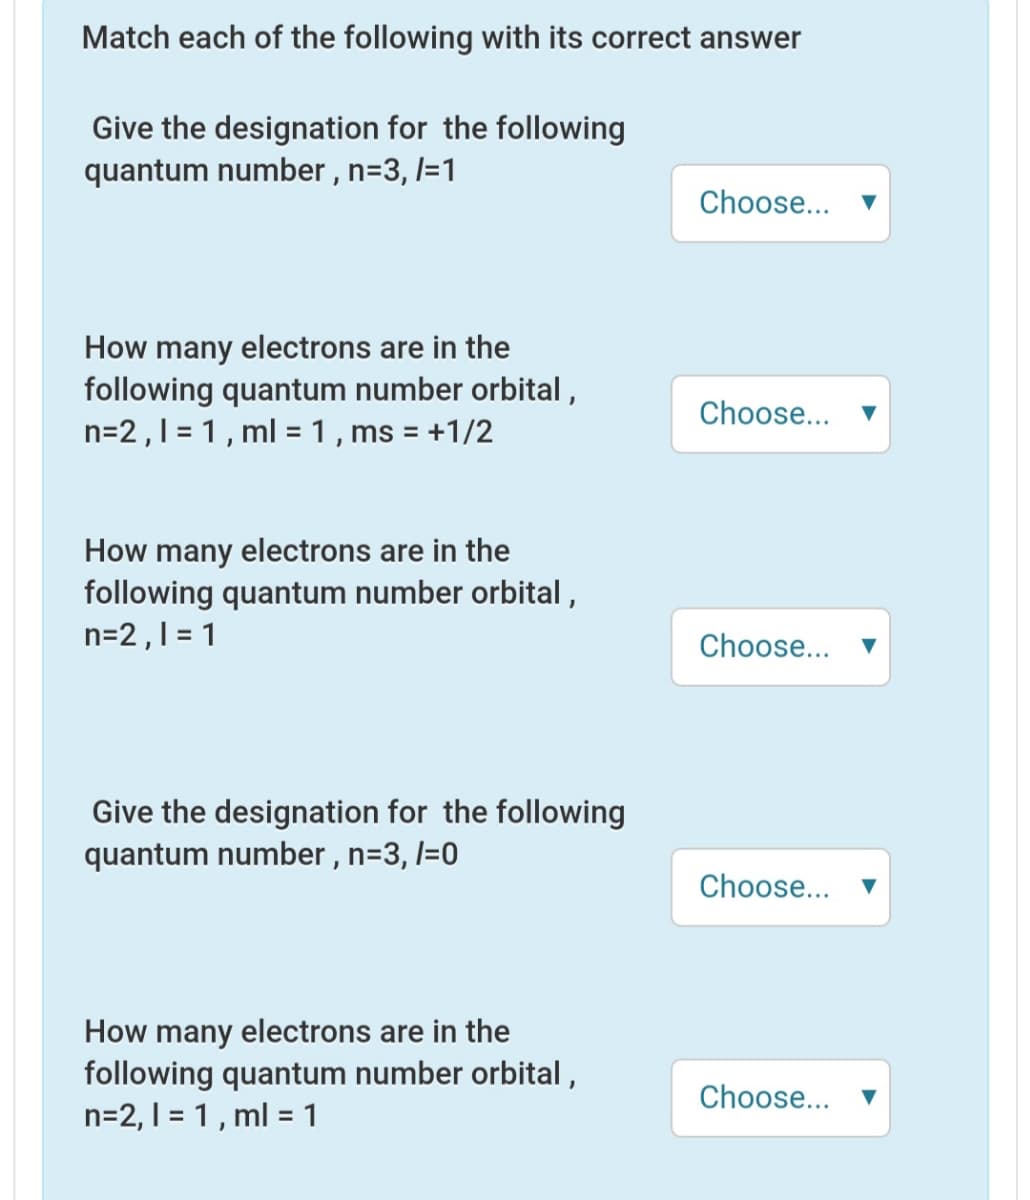 Match each of the following with its correct answer
Give the designation for the following
quantum number , n=3, l=1
Choose...
How many electrons are in the
following quantum number orbital ,
n=2,1 = 1, ml = 1, ms = +1/2
Choose...
%3D
How many electrons are in the
following quantum number orbital,
n=2,1 = 1
Choose...
Give the designation for the following
quantum number , n=3, l=0
Choose...
How many electrons are in the
following quantum number orbital,
n=2, 1 = 1 , ml = 1
Choose...
%3D
